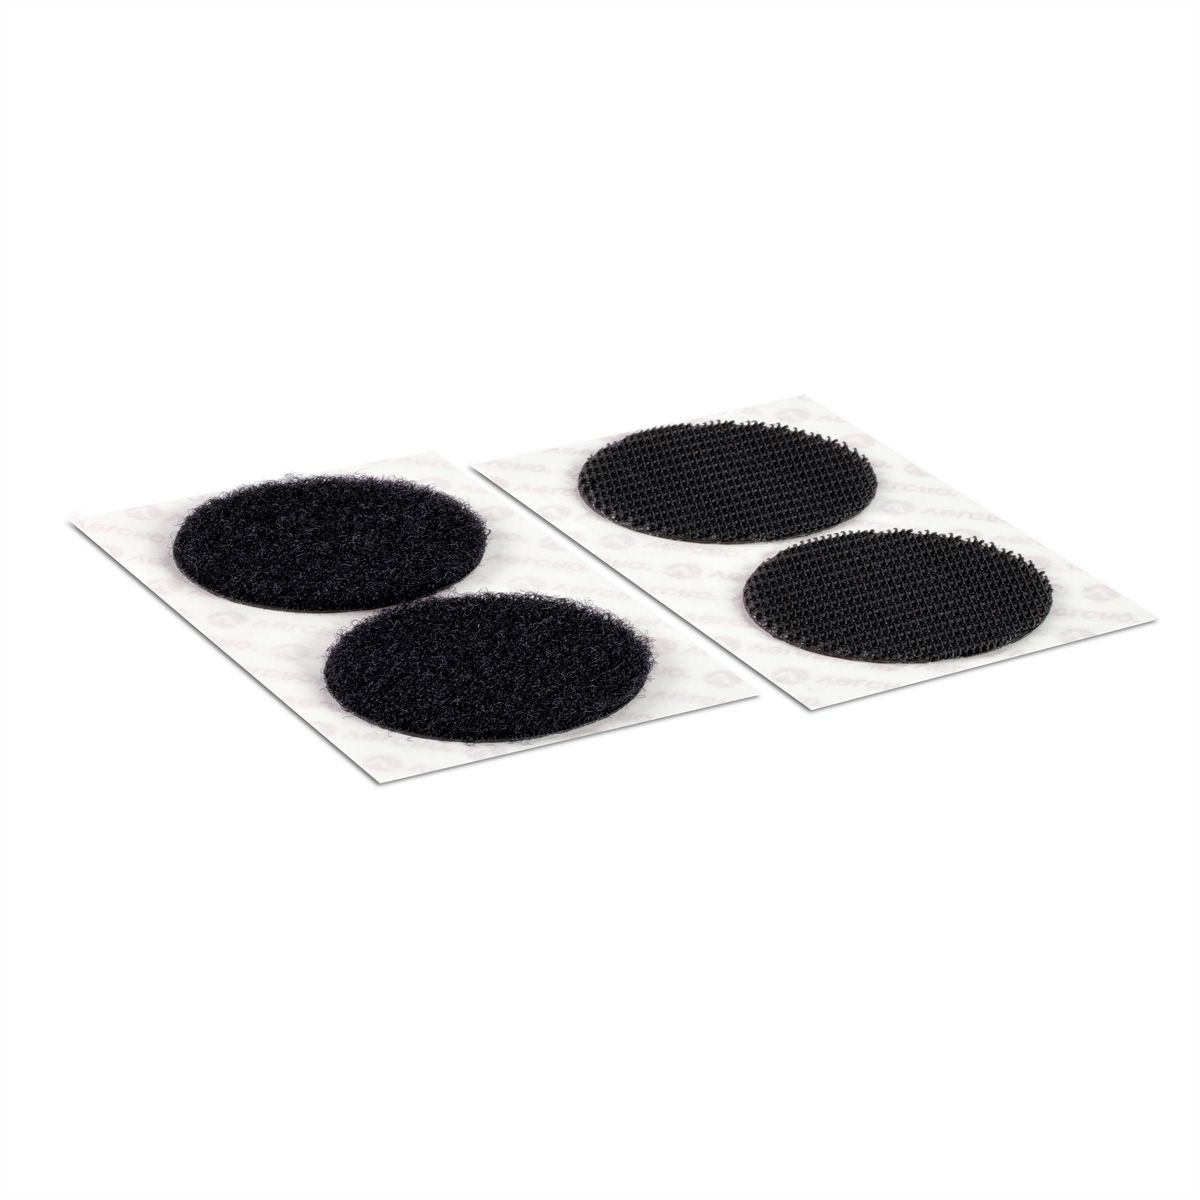 VELCRO® Boutons ronds 45mm x 2 noirs, crochets&velours autocollants extra  fort, noirs - SECOMP France